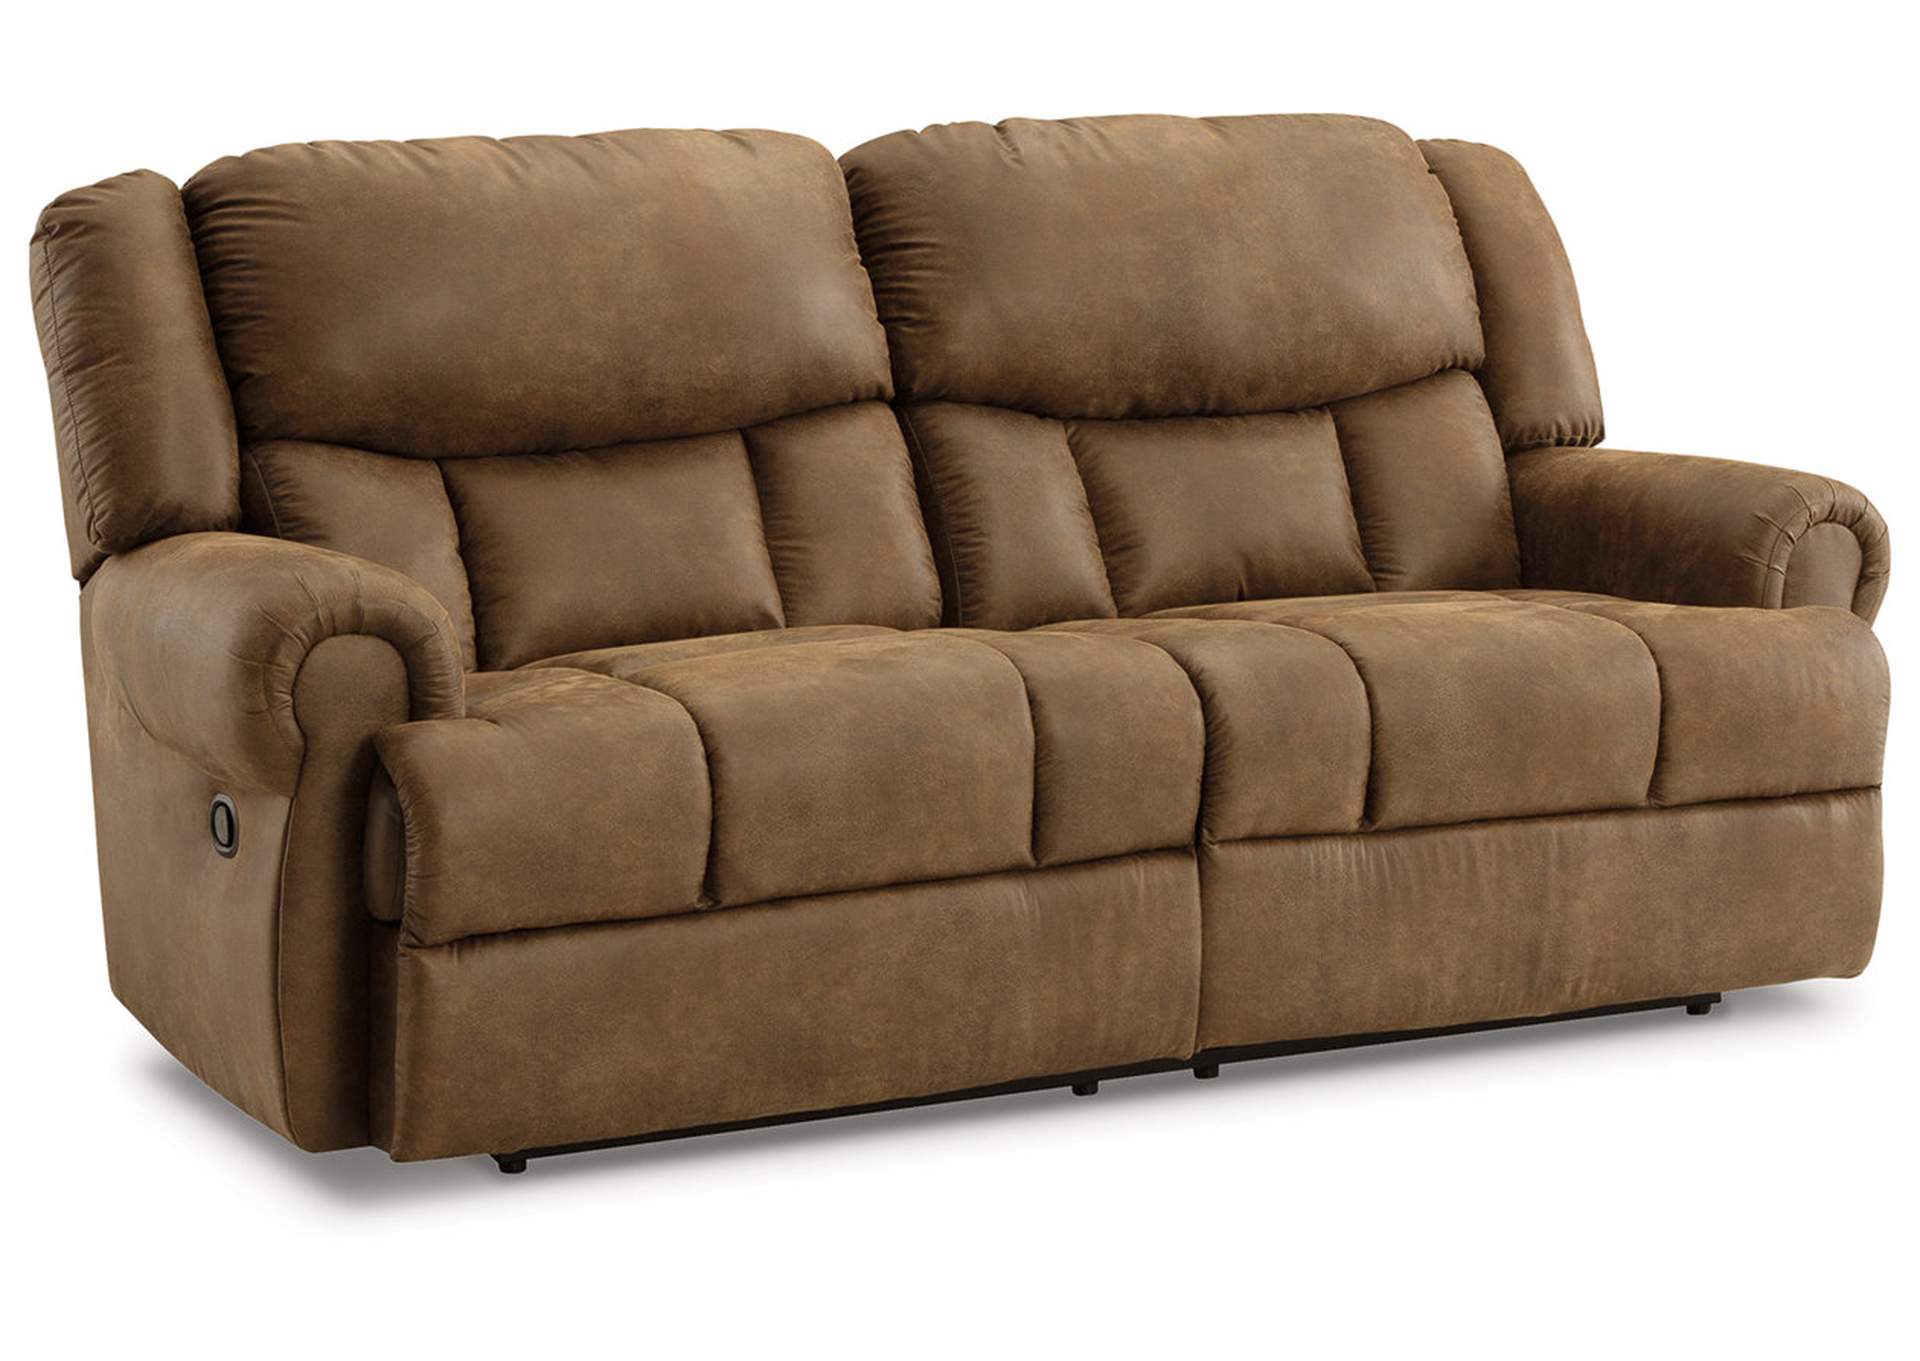 Boothbay Reclining Sofa,Signature Design By Ashley